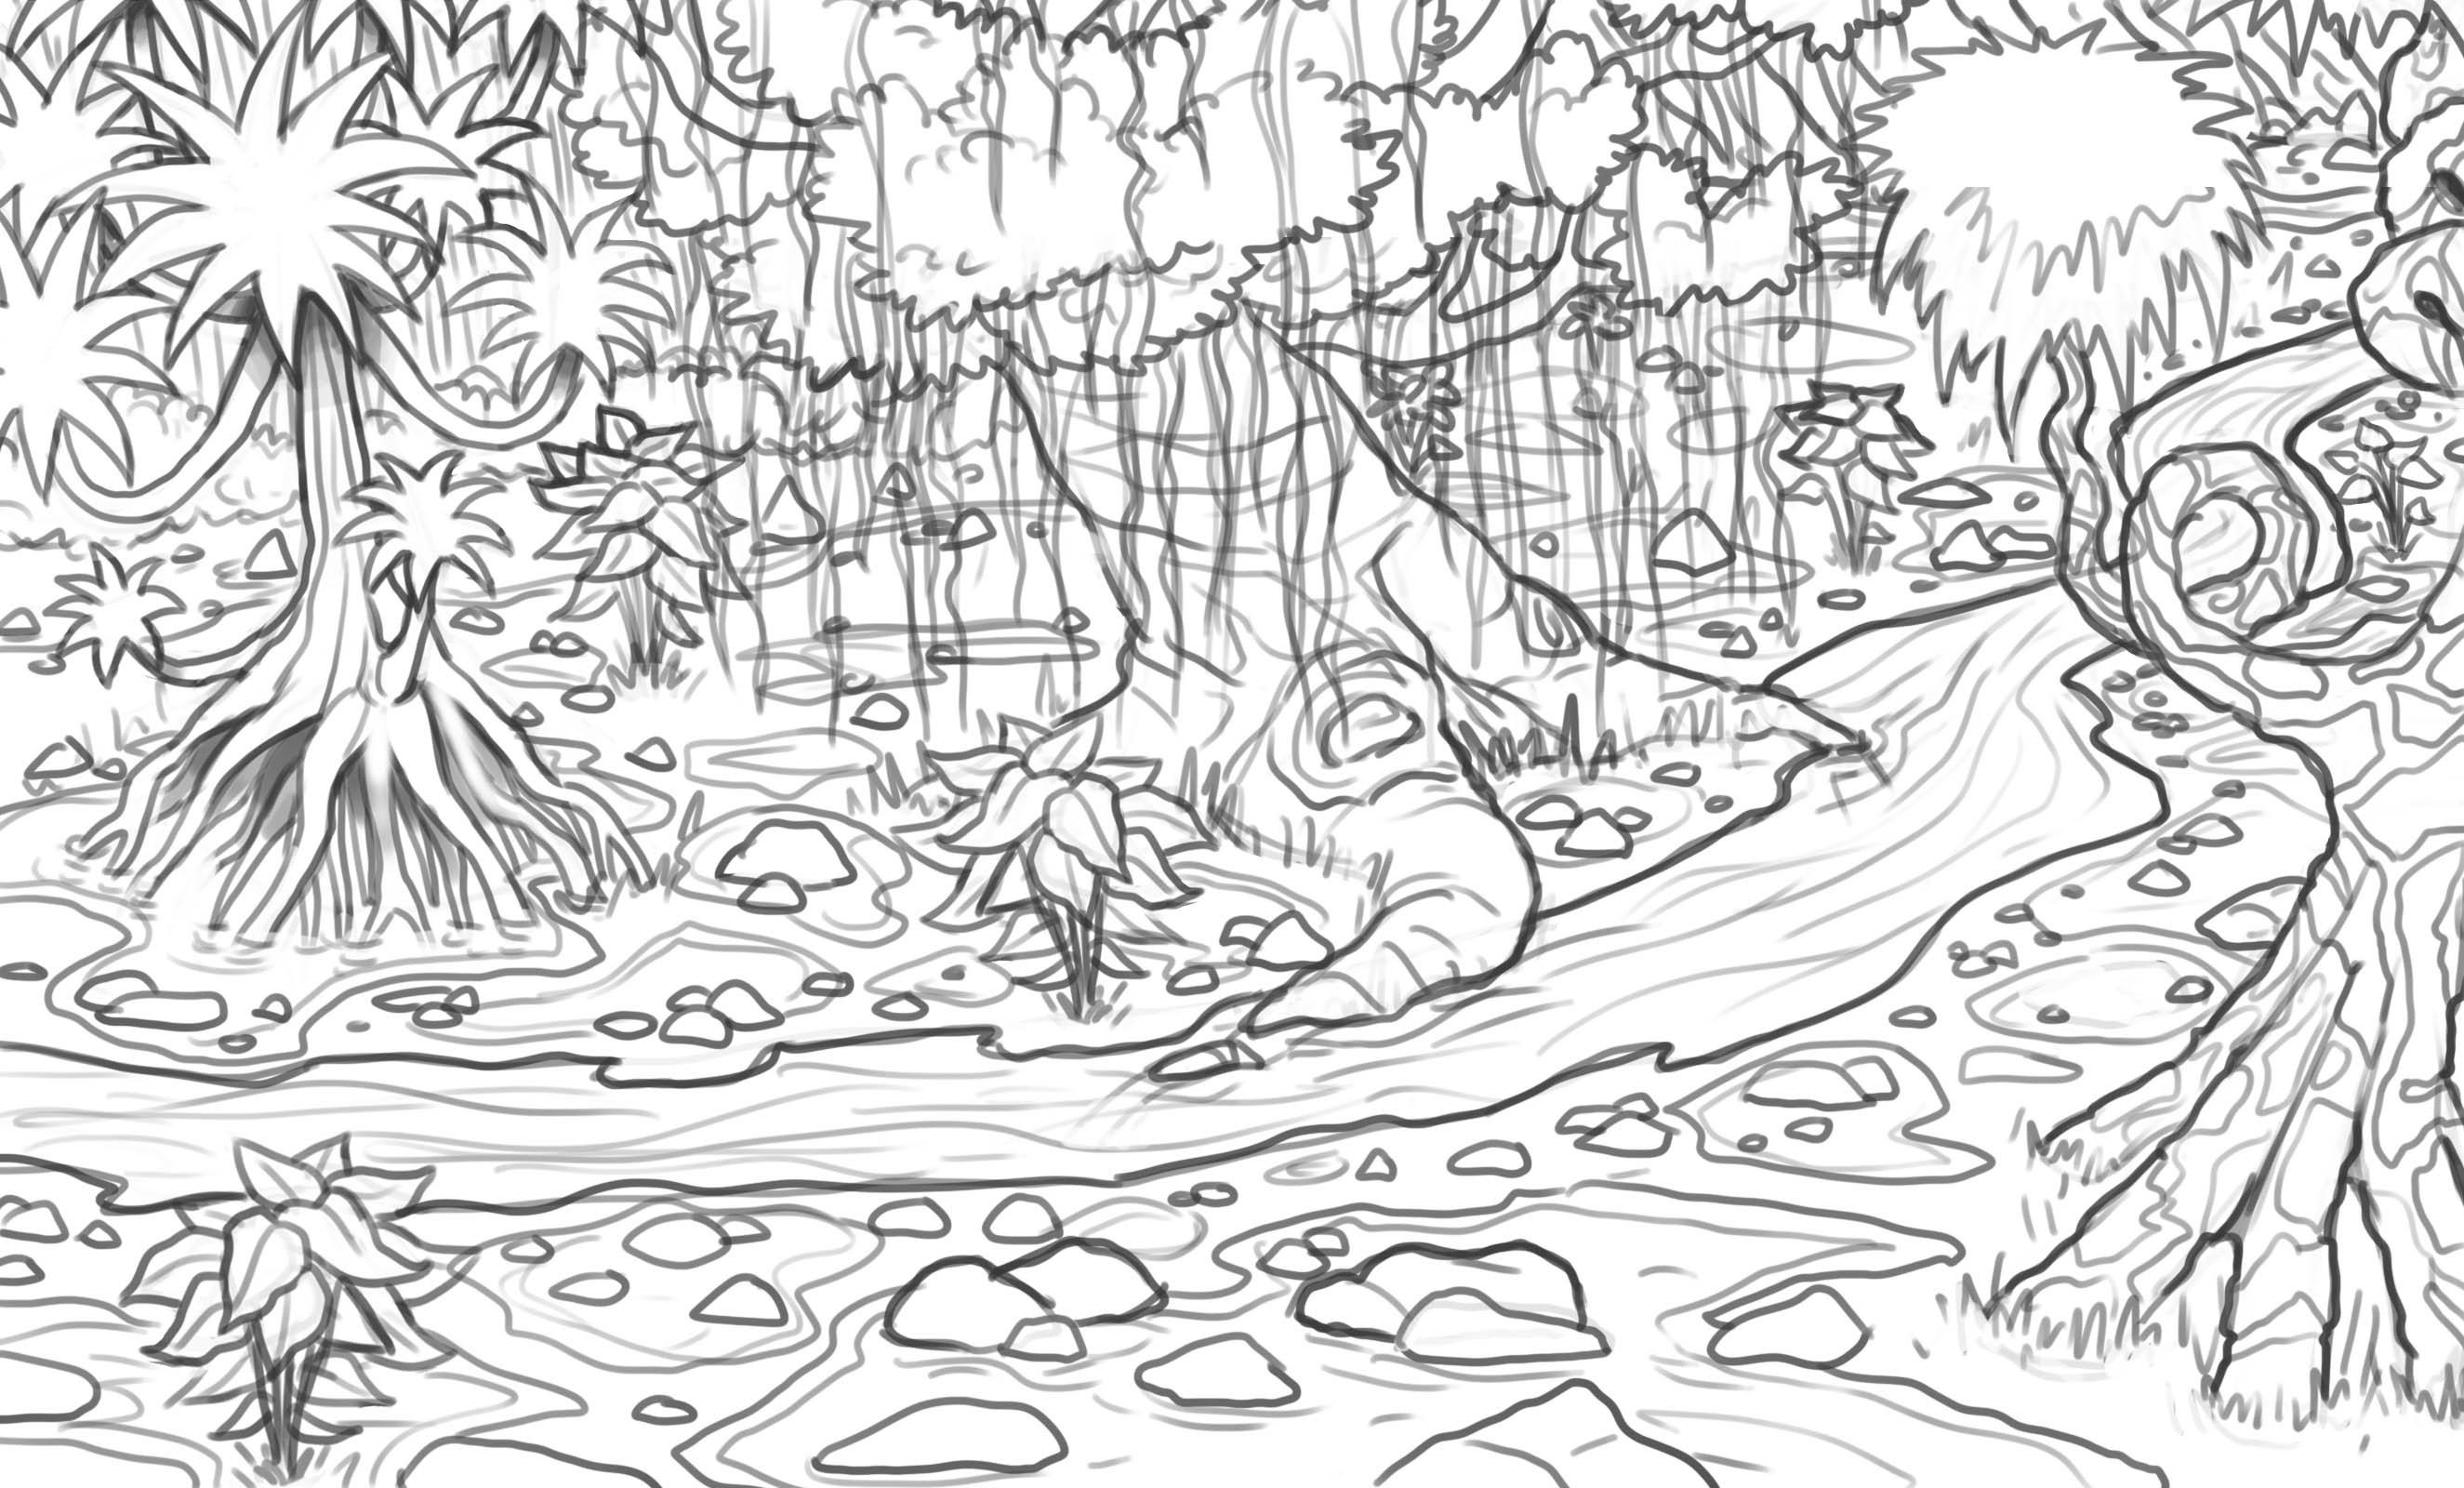 Tropical Rainforest Drawing Simple : What are the main features that ...